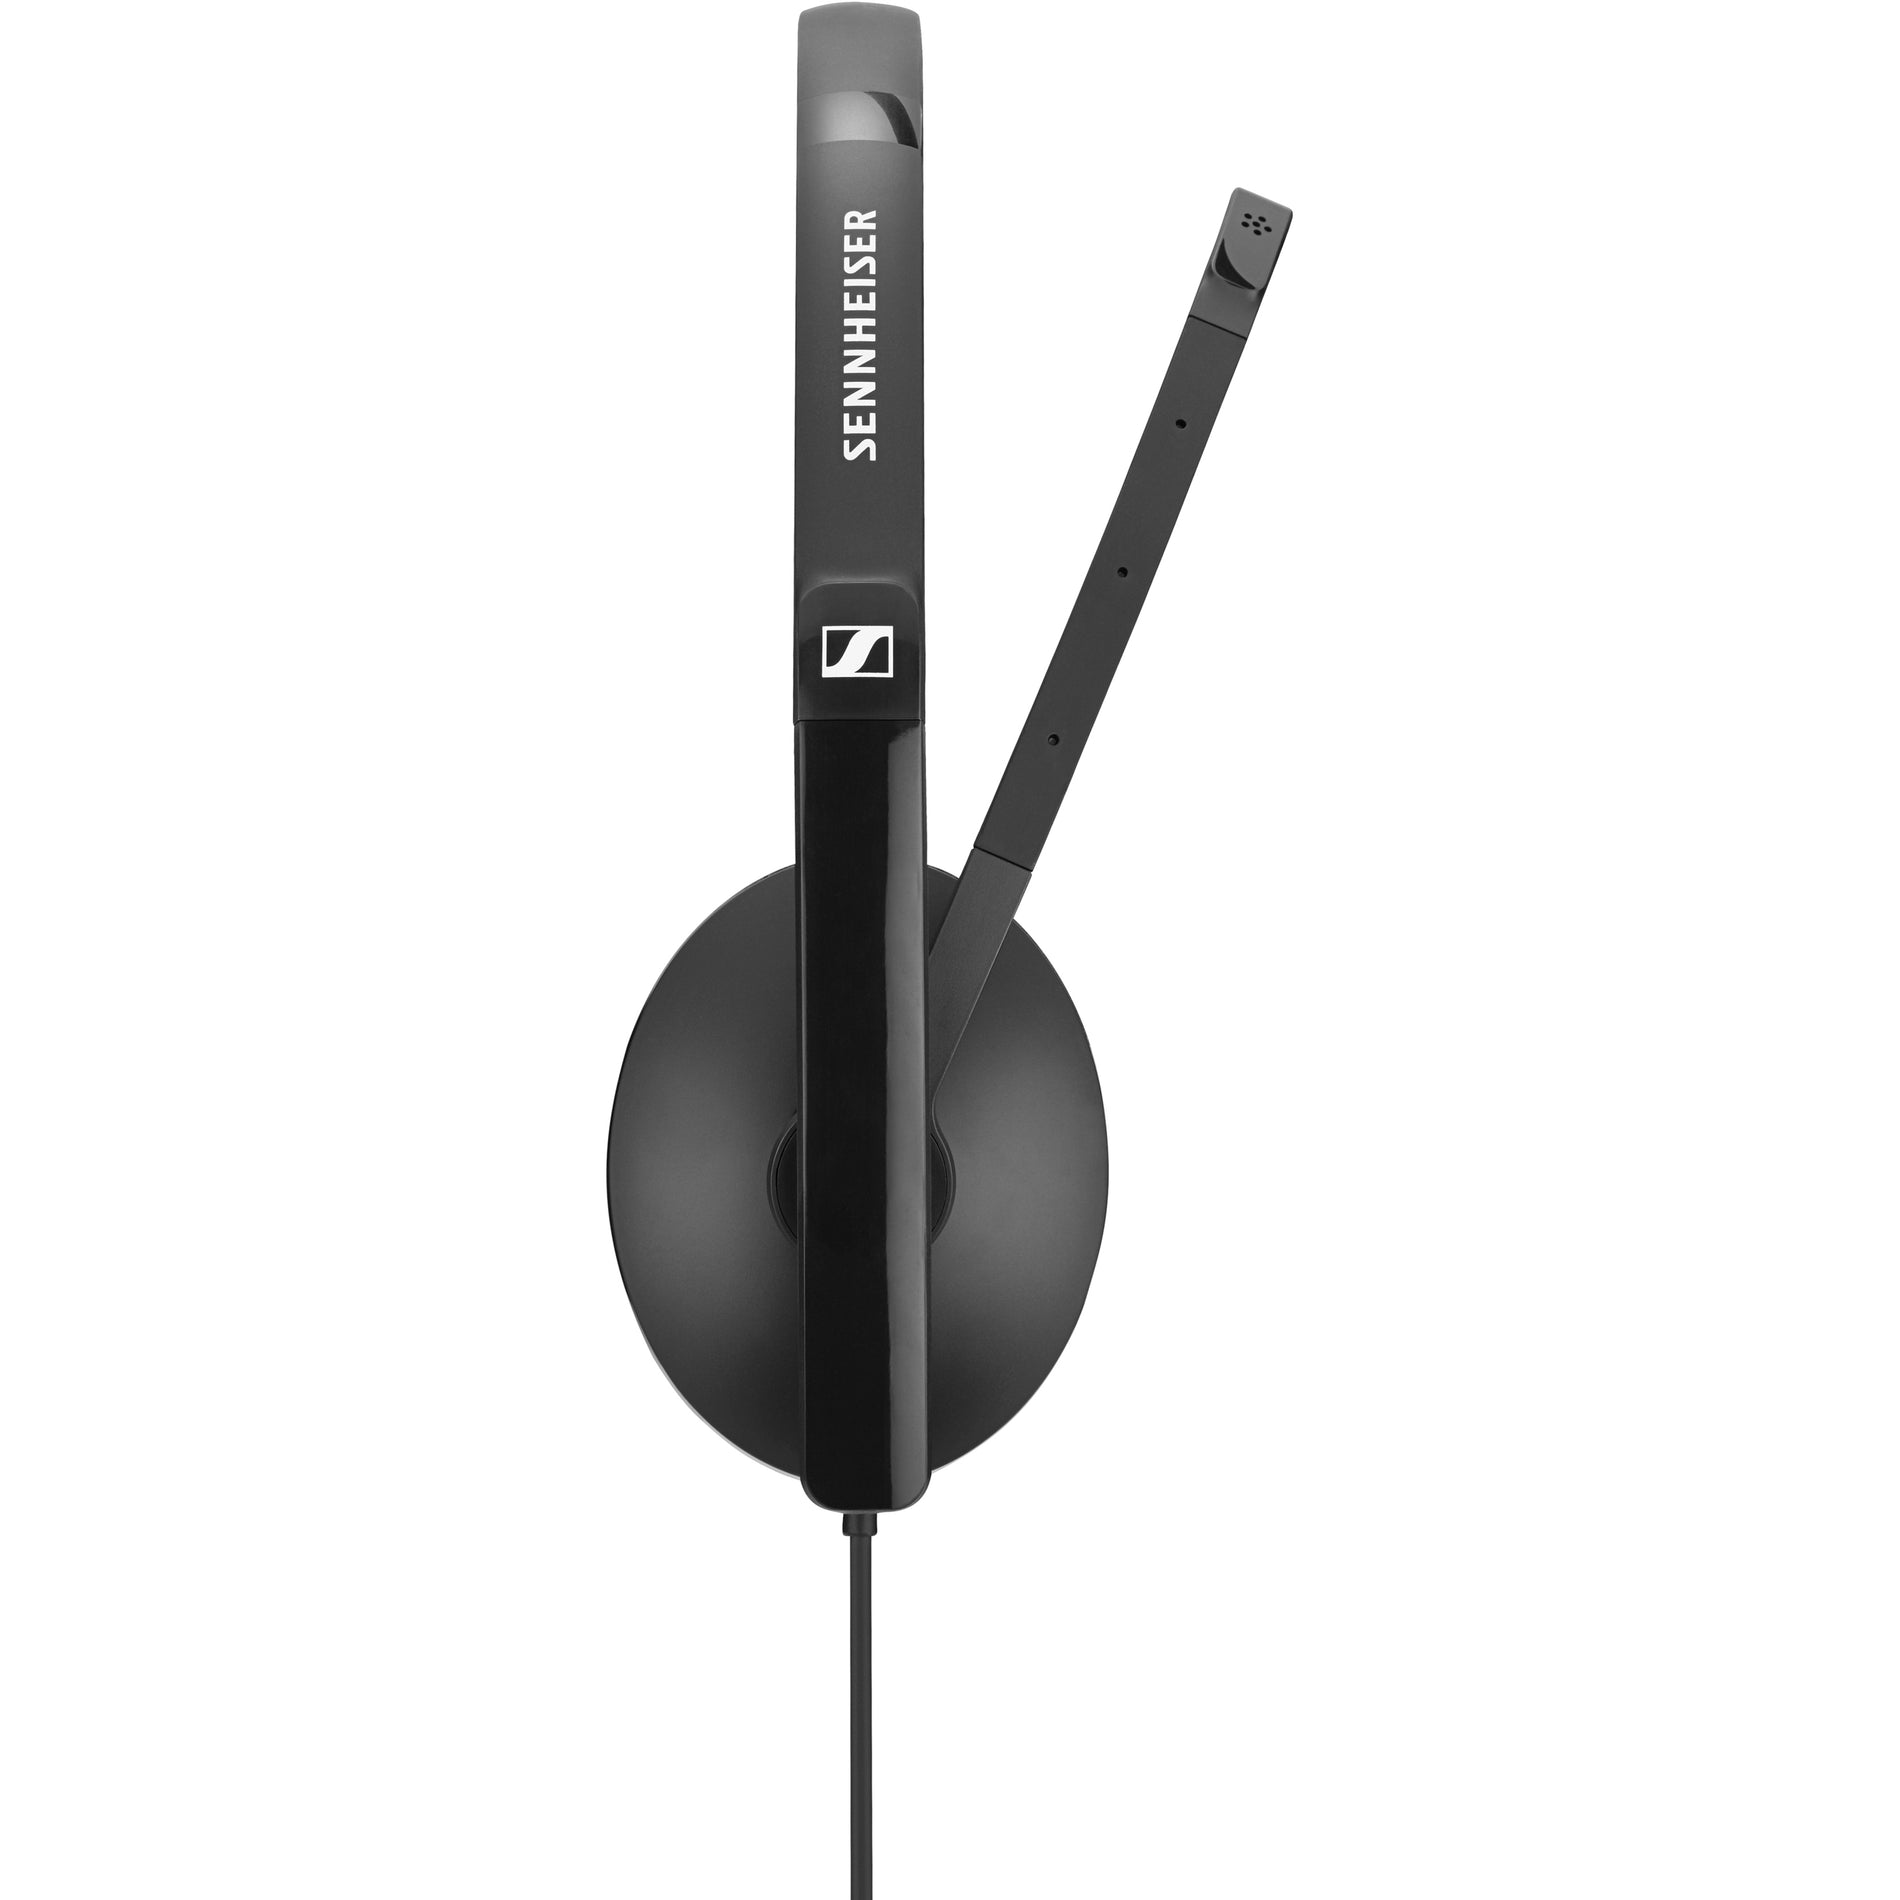 Sennheiser 508354 SC 160 USB-C Headset, Binaural Over-the-head Stereo Headset with Noise Cancelling Microphone